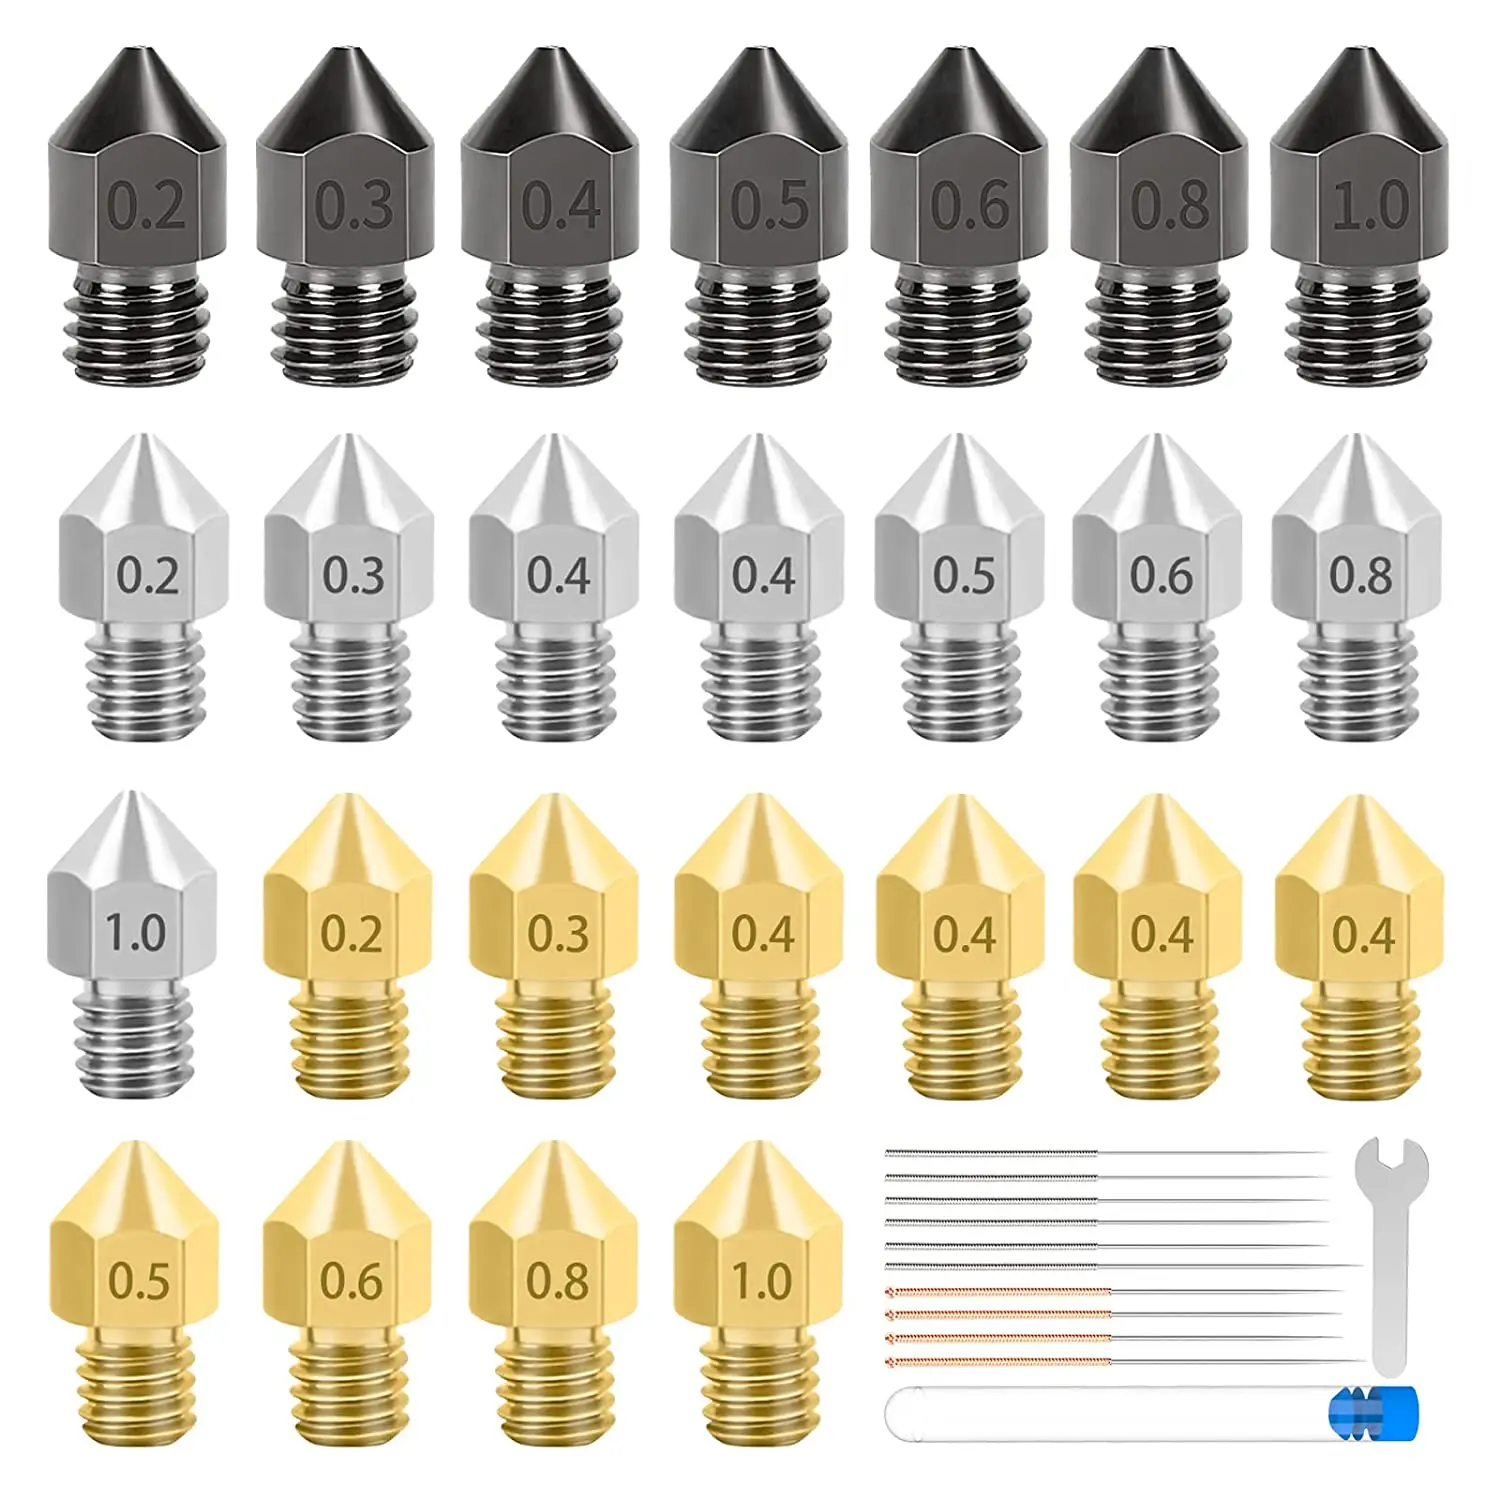 Mk8 Extruder Hardened Steel Stainless Steel Brass Nozzle 0.2 0.3 0.4 0.5 0.6 0.8 1.0mm For A8 Ender 3 Cr10